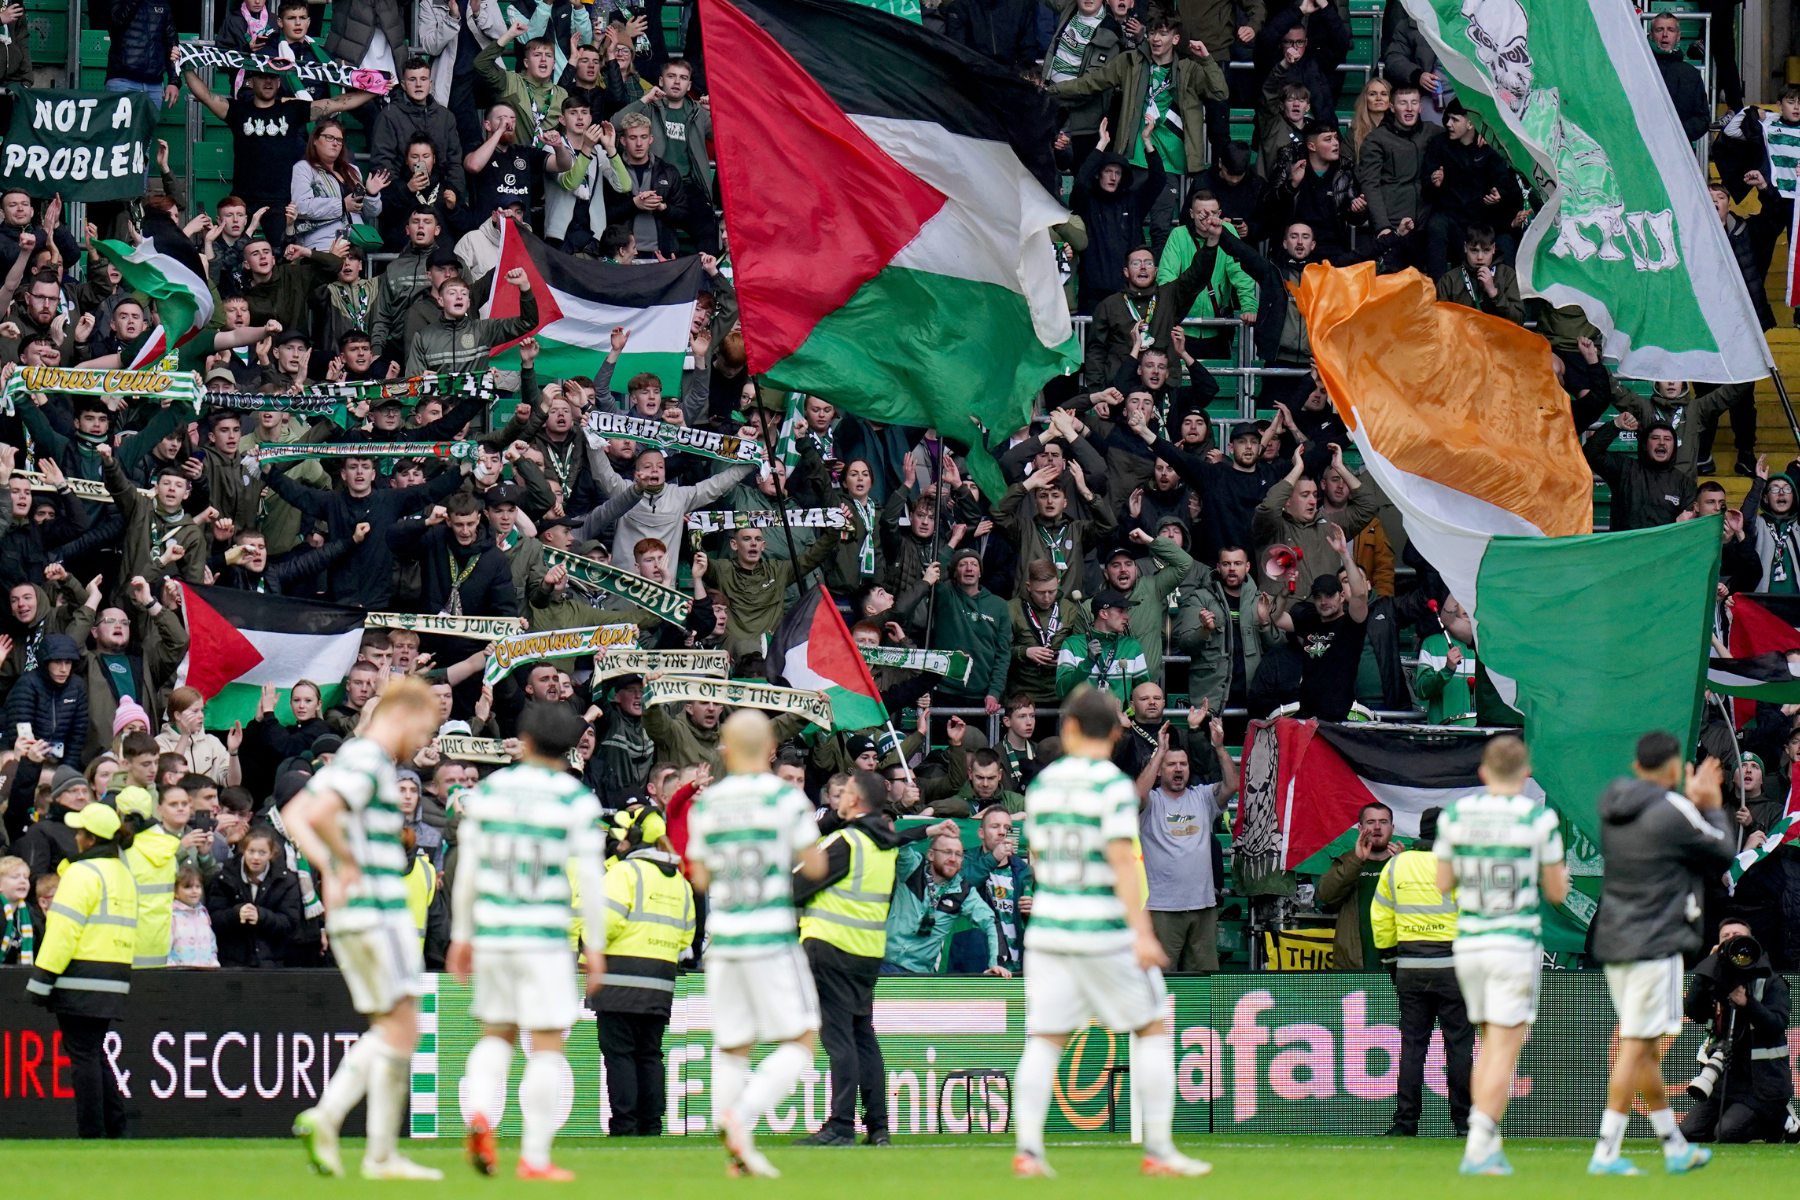 The Green Brigade takes aim at Celtic over Palestine stance